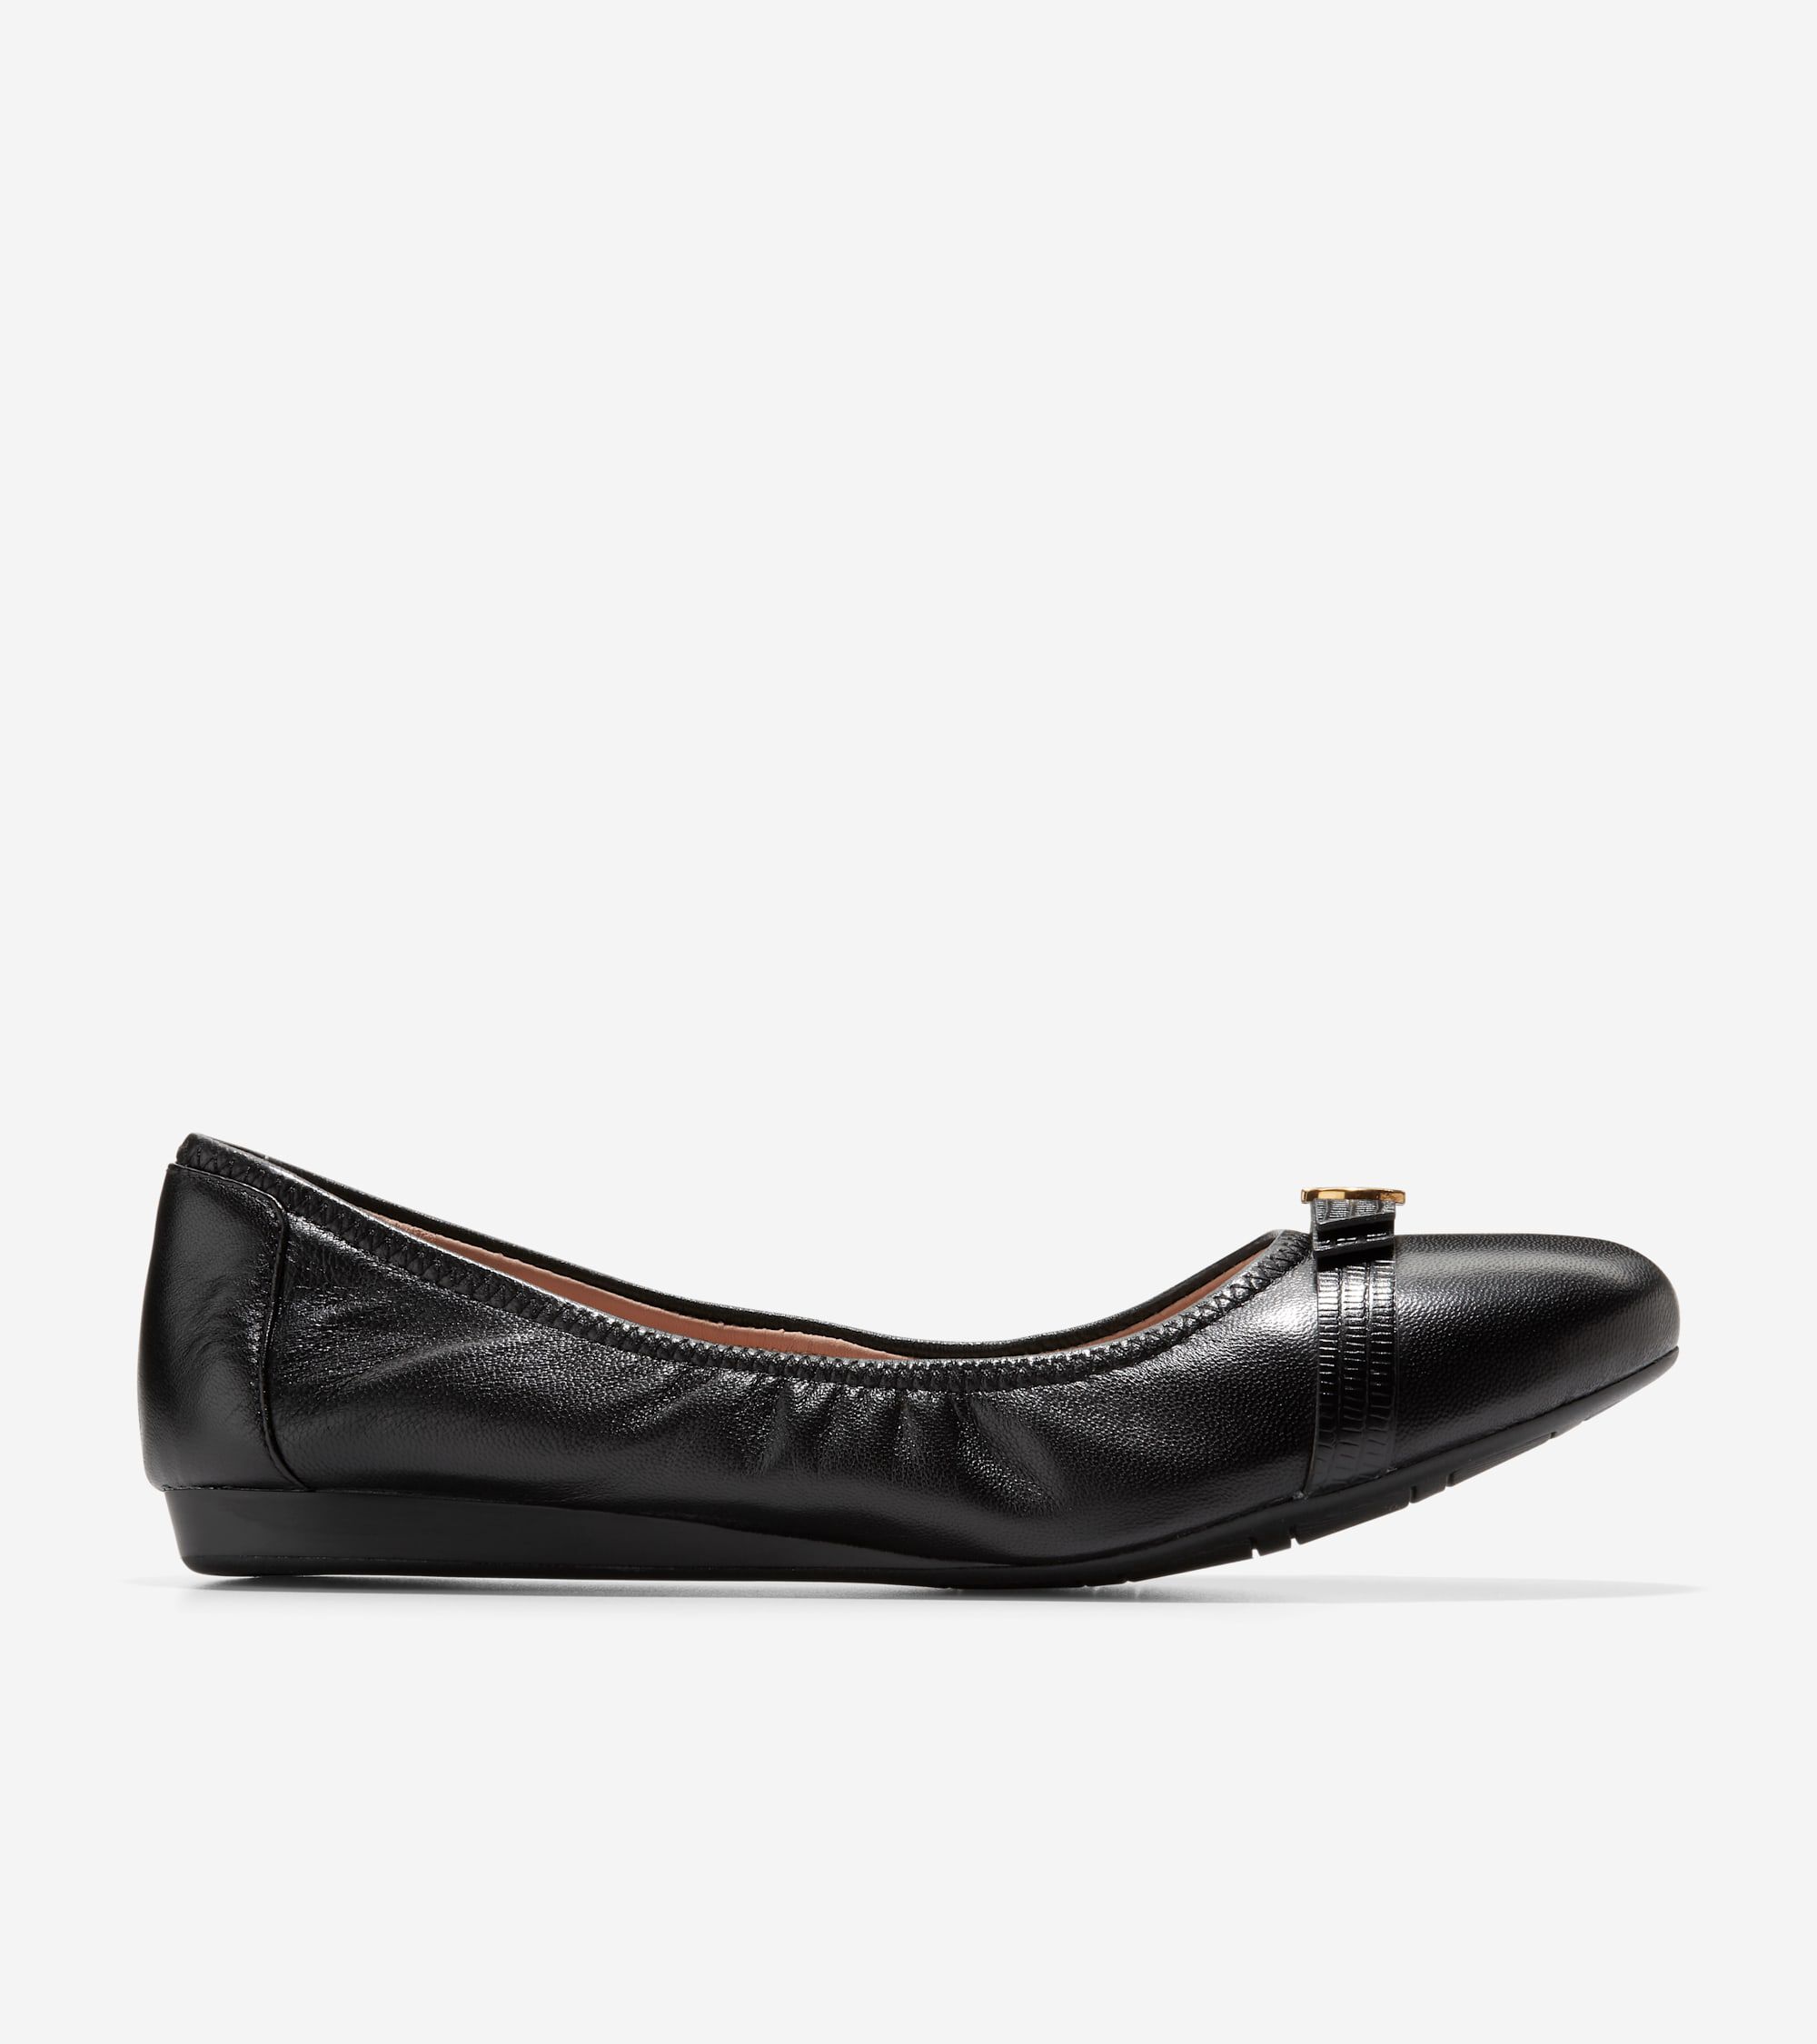 Women's Shoes & Accesories On Sale | Cole Haan